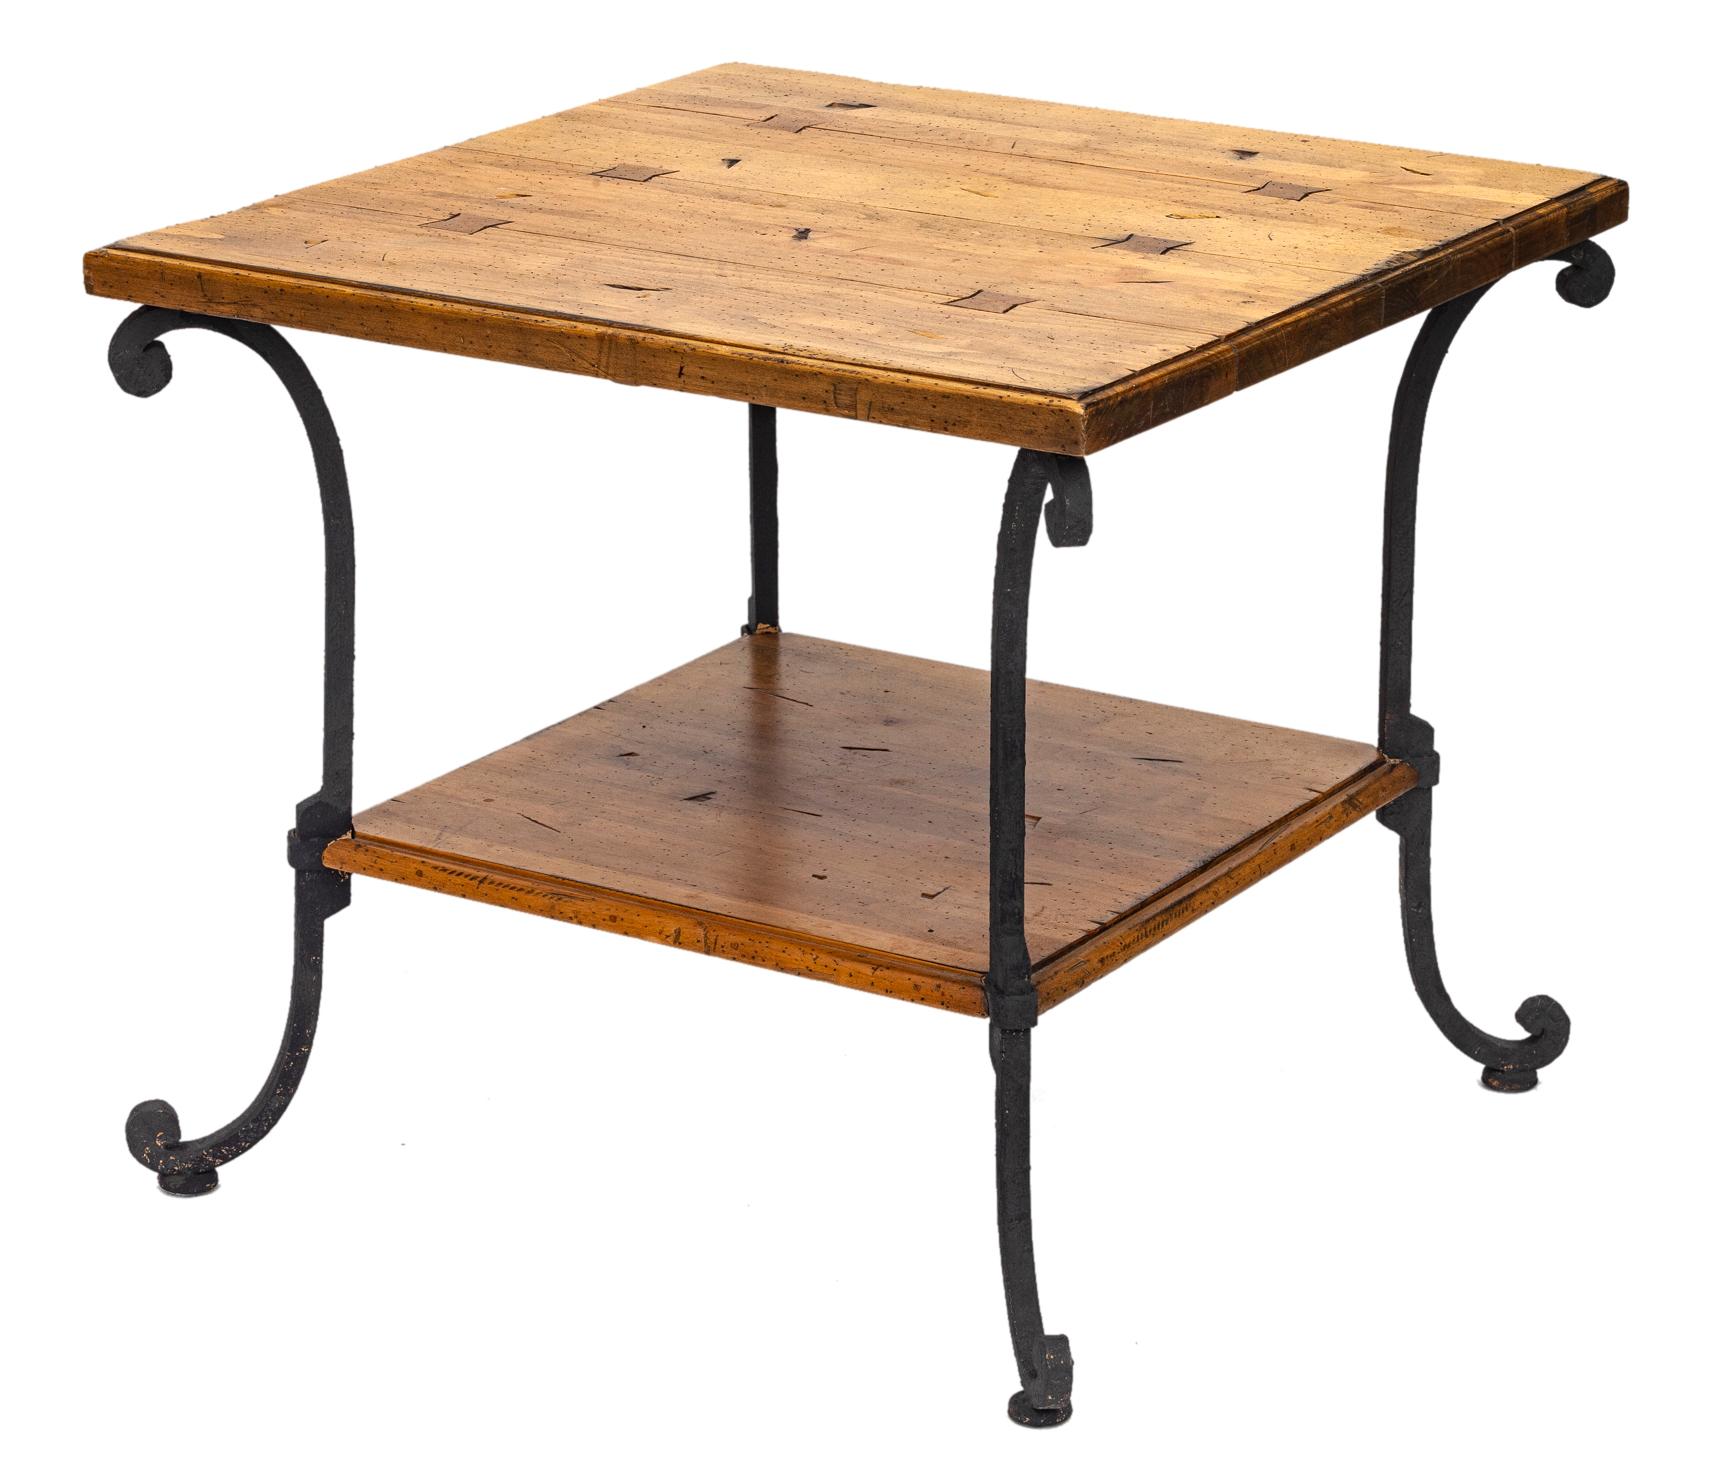 Forged Two-Tiered Pine Table with Wrought Iron Legs For Sale